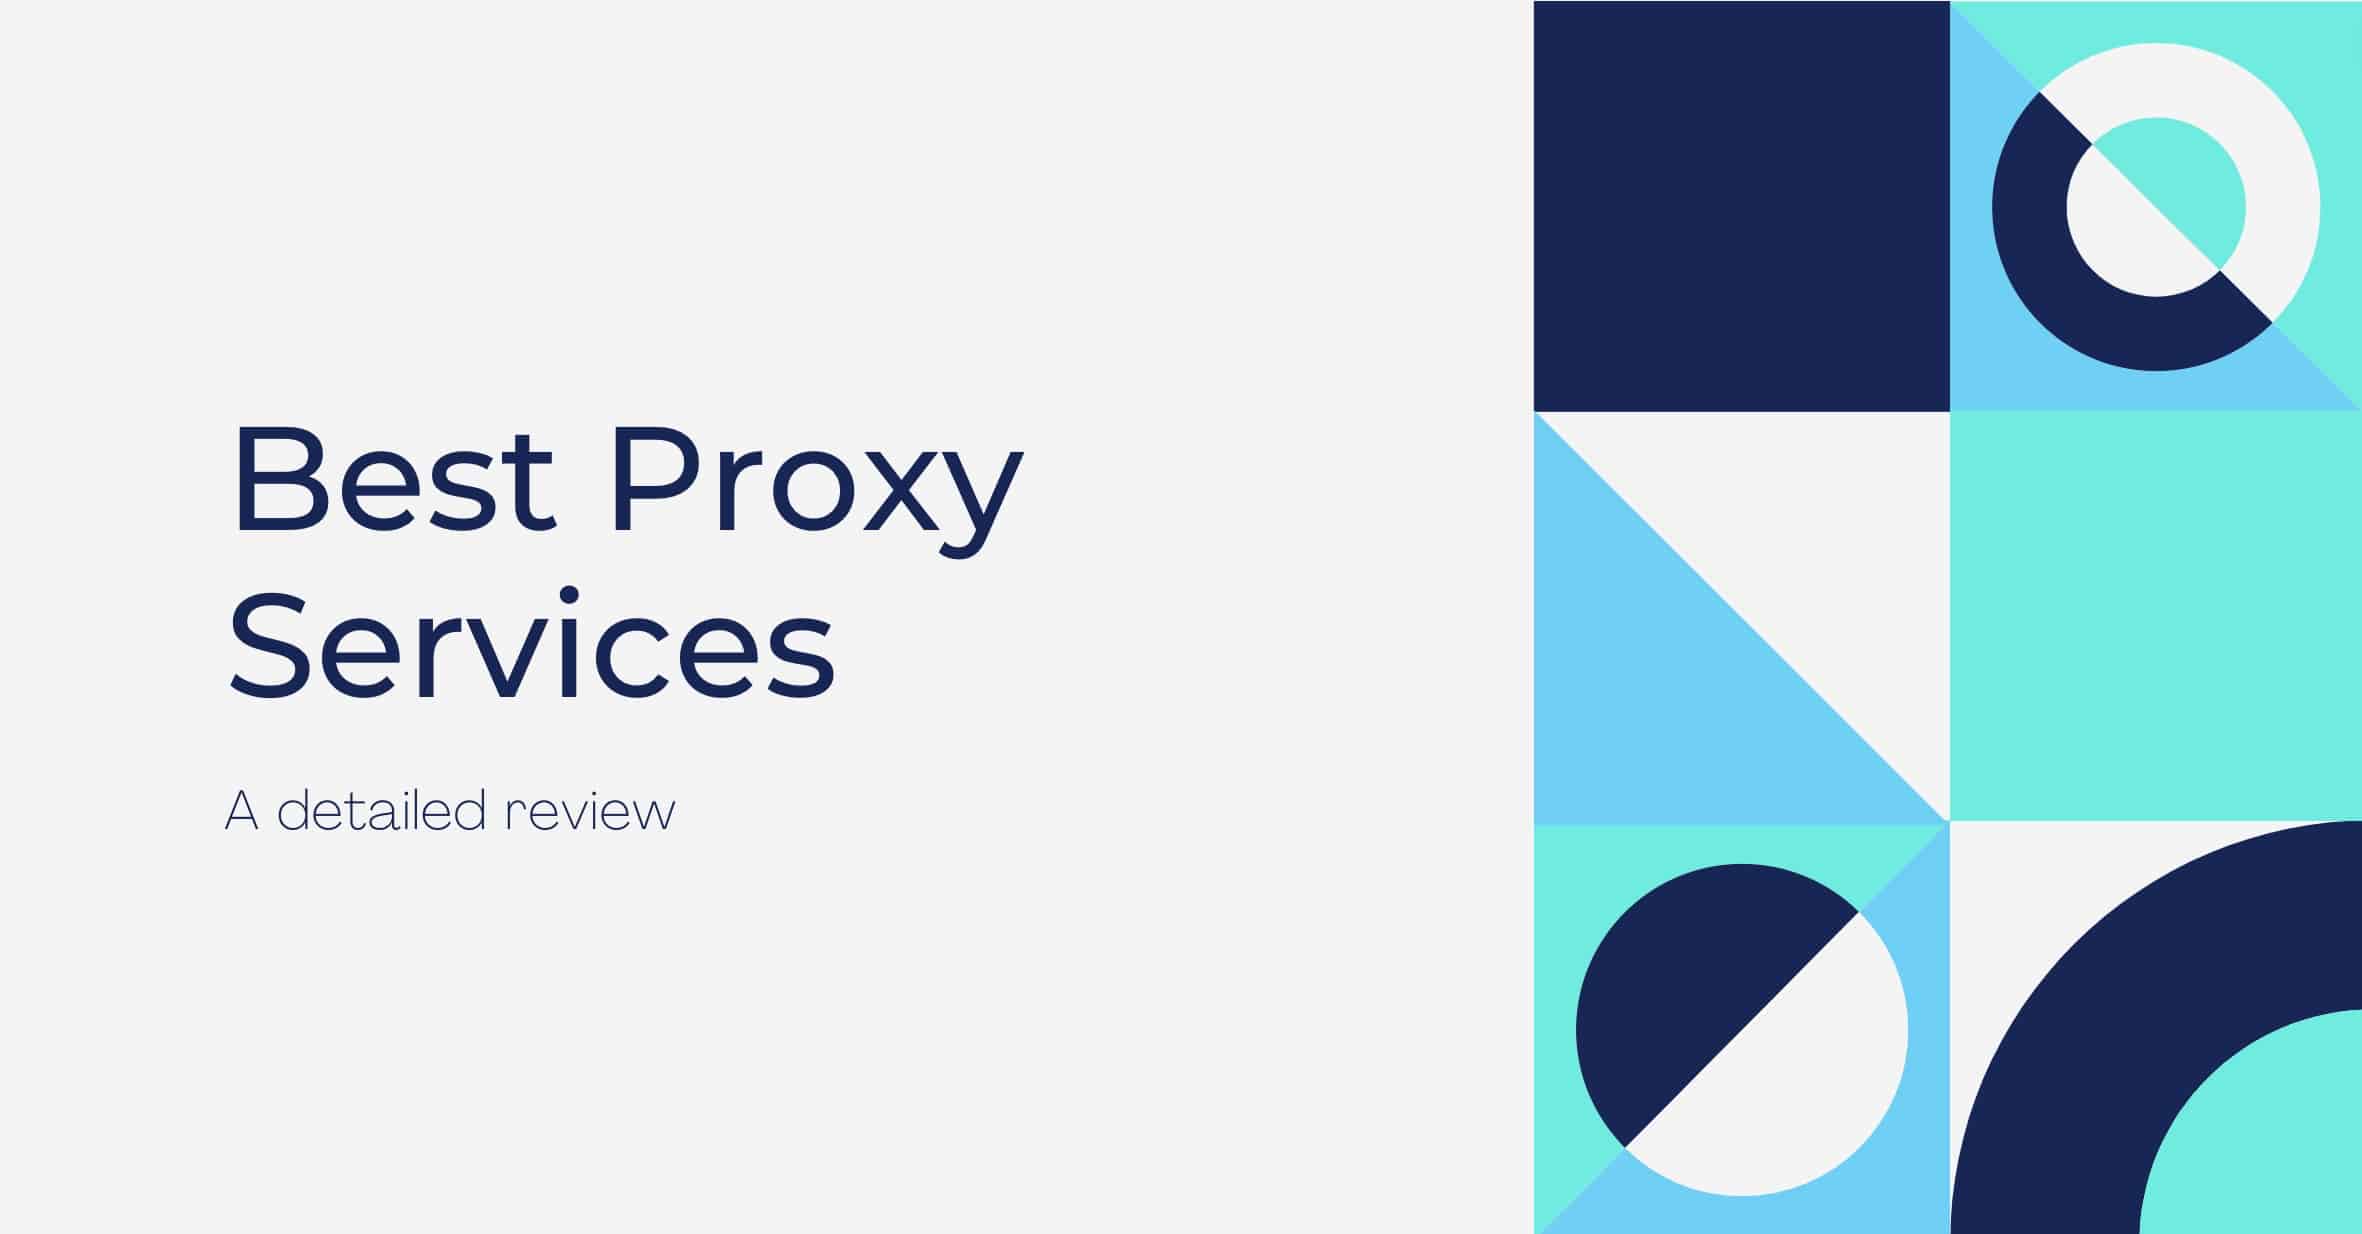 How to Choose the Best Proxy Service